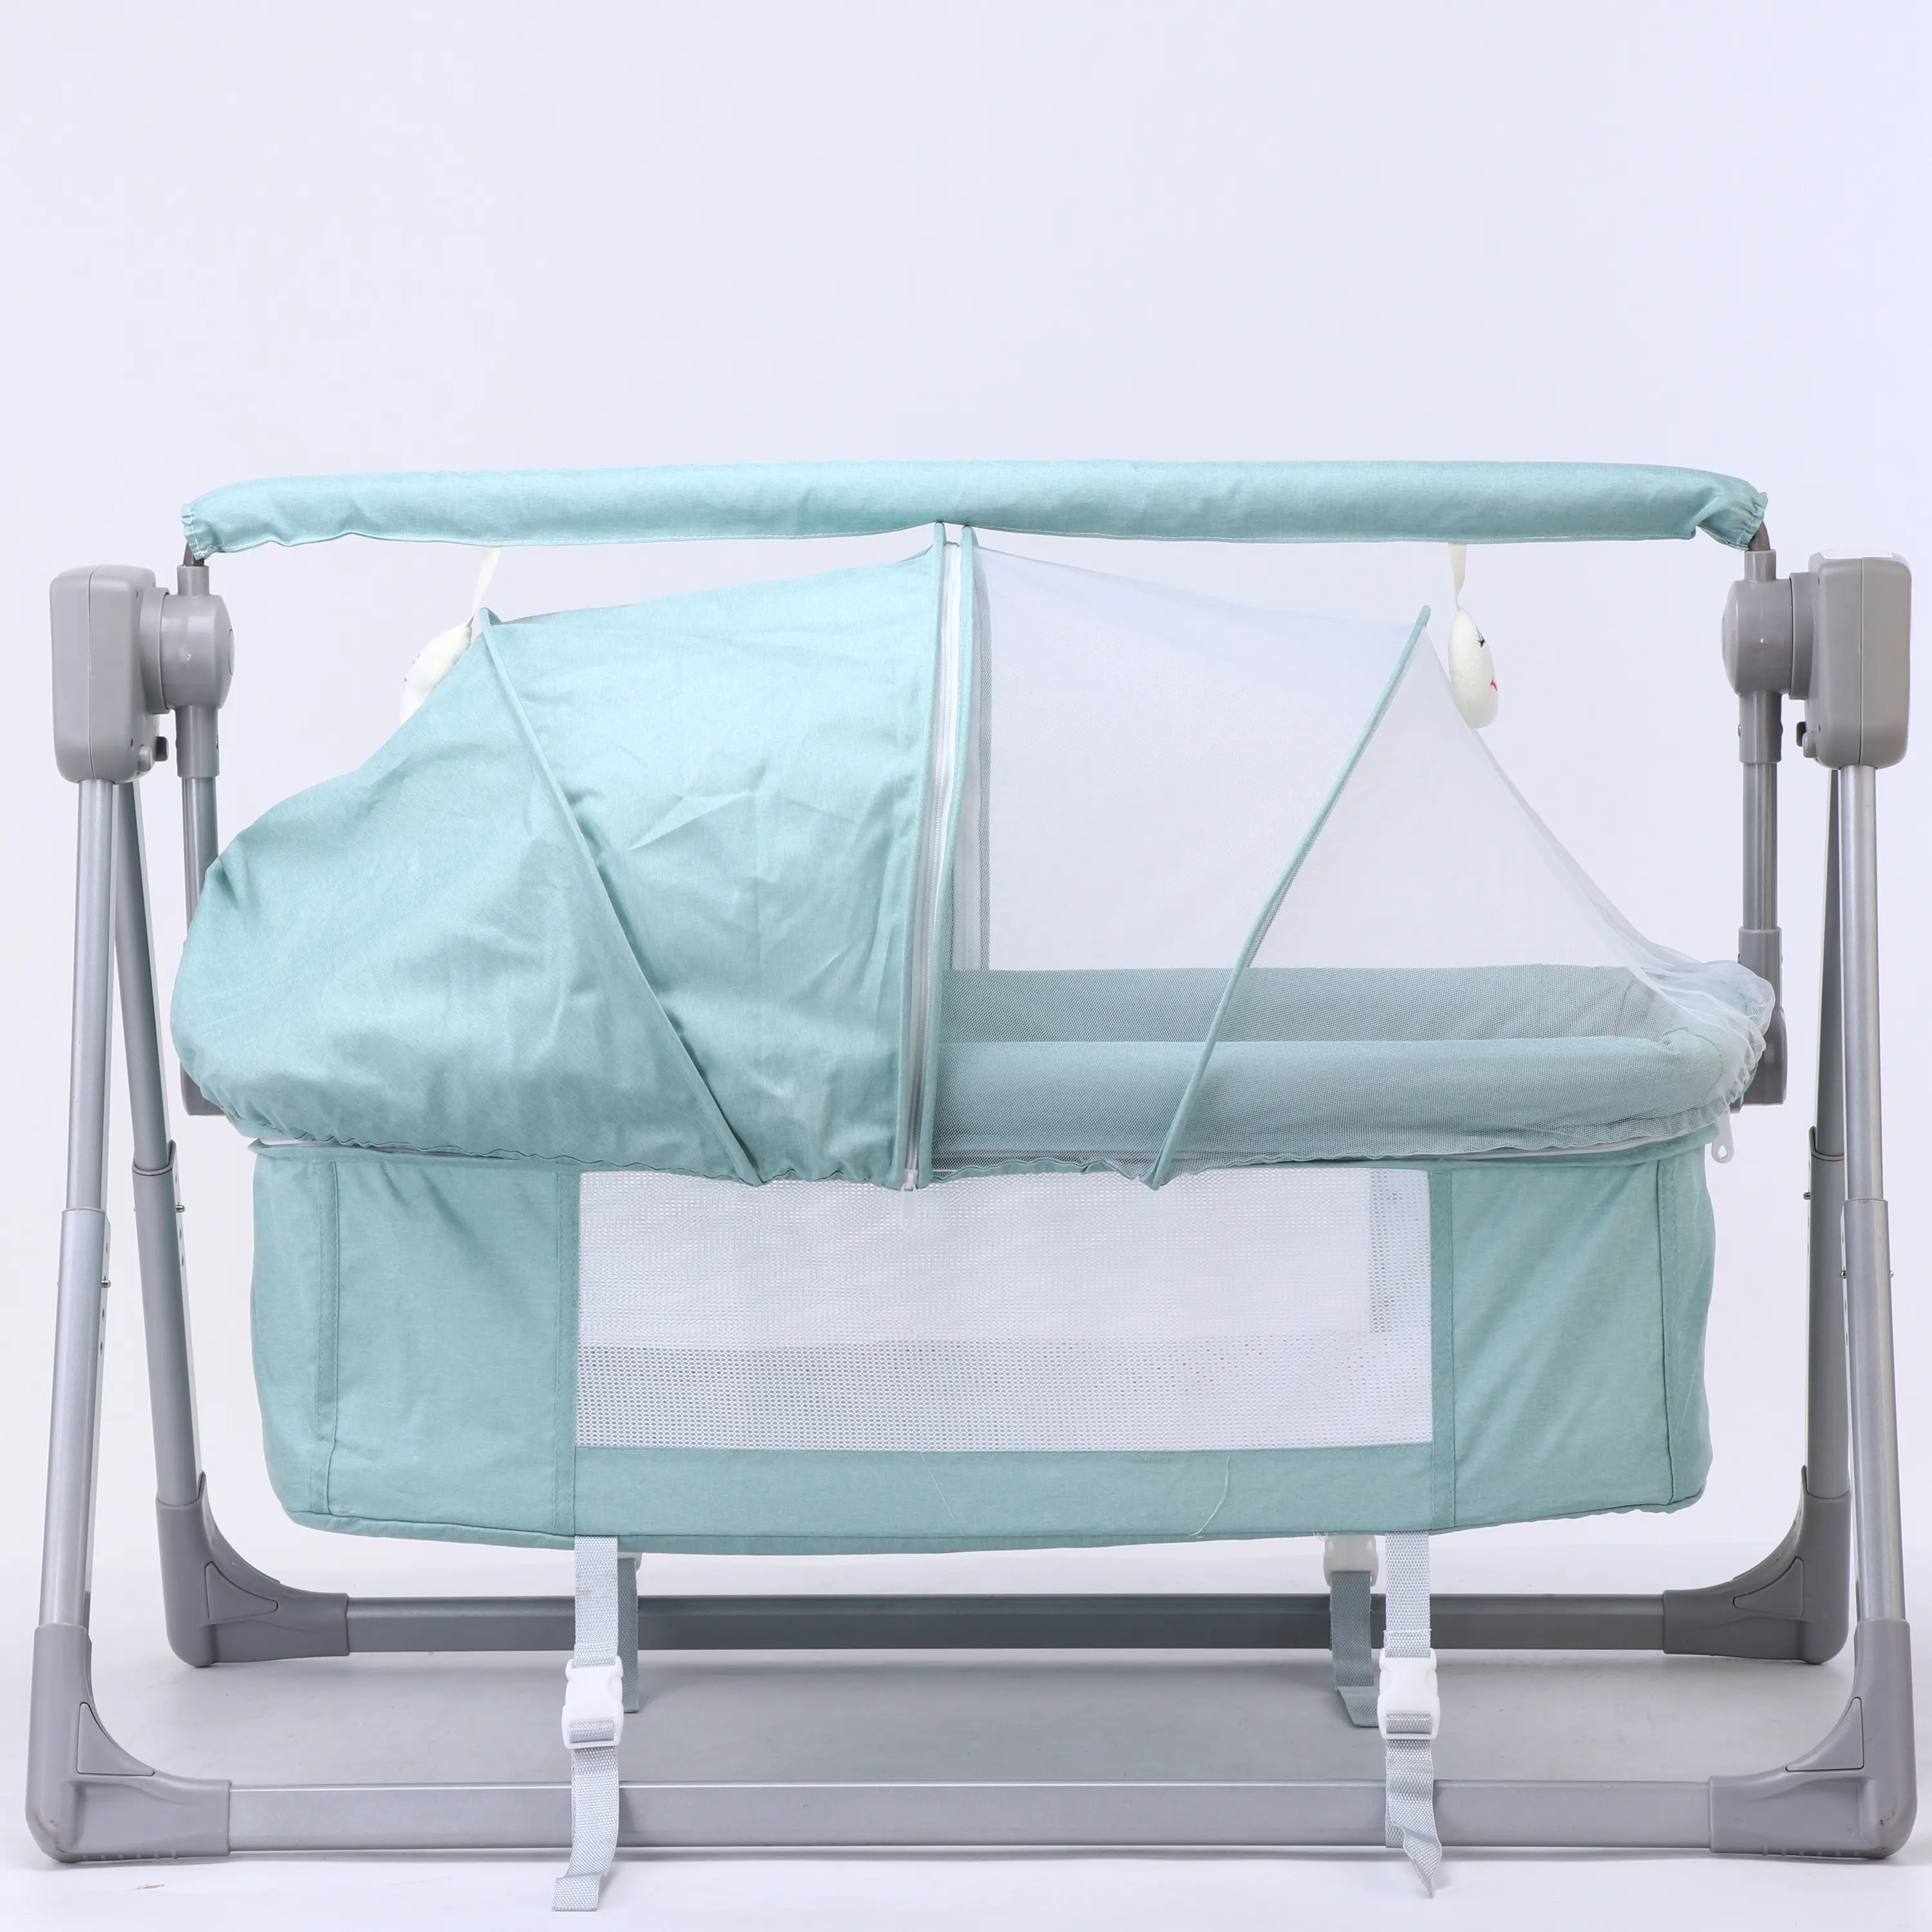 Hot sale baby automatic cradle with mosquito net music cradle